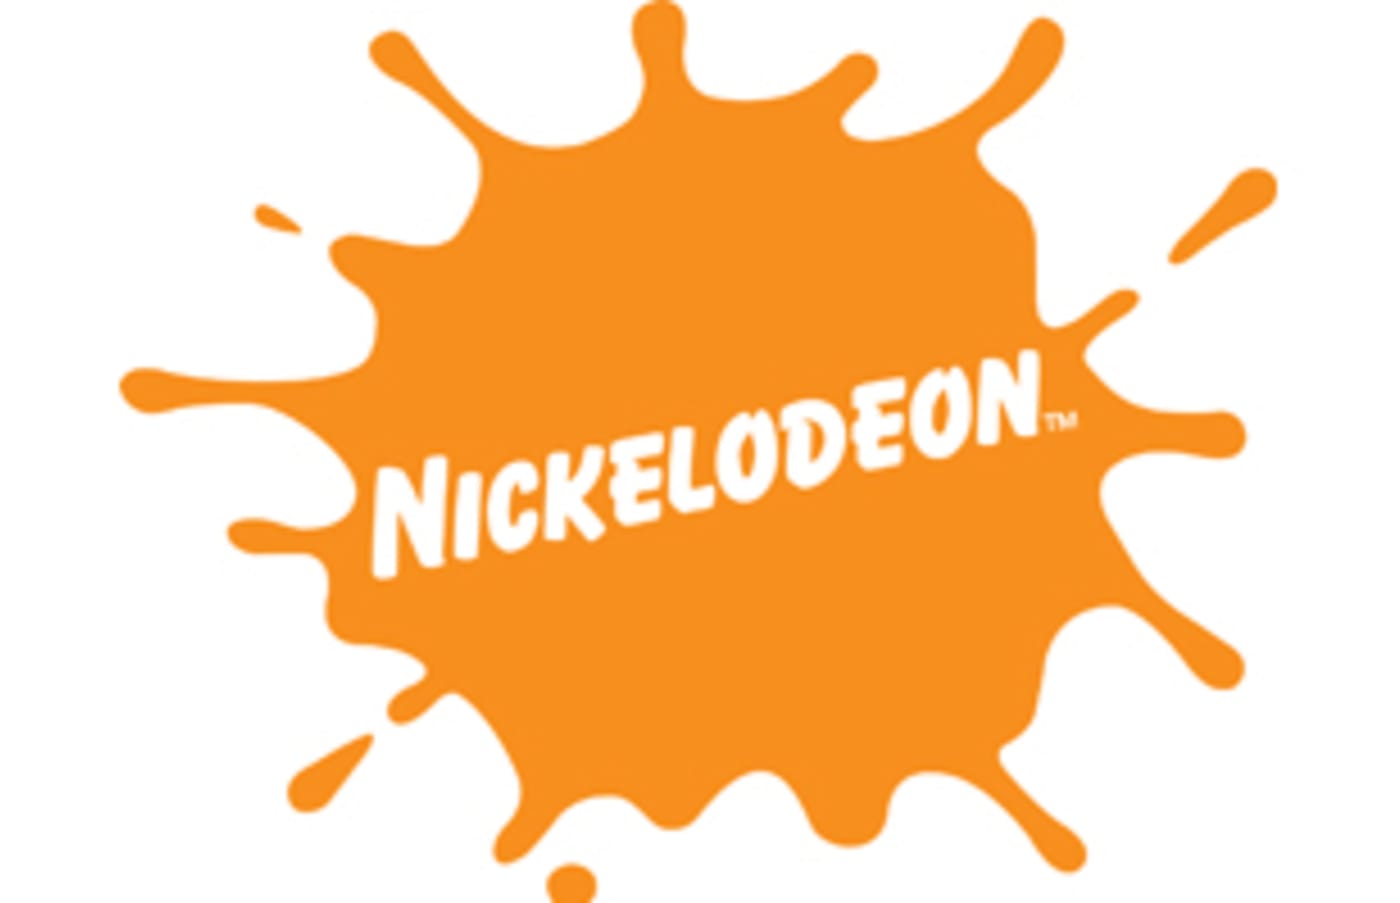 Nickelodeon: Find The Latest Nickelodeon Stories, News & Features